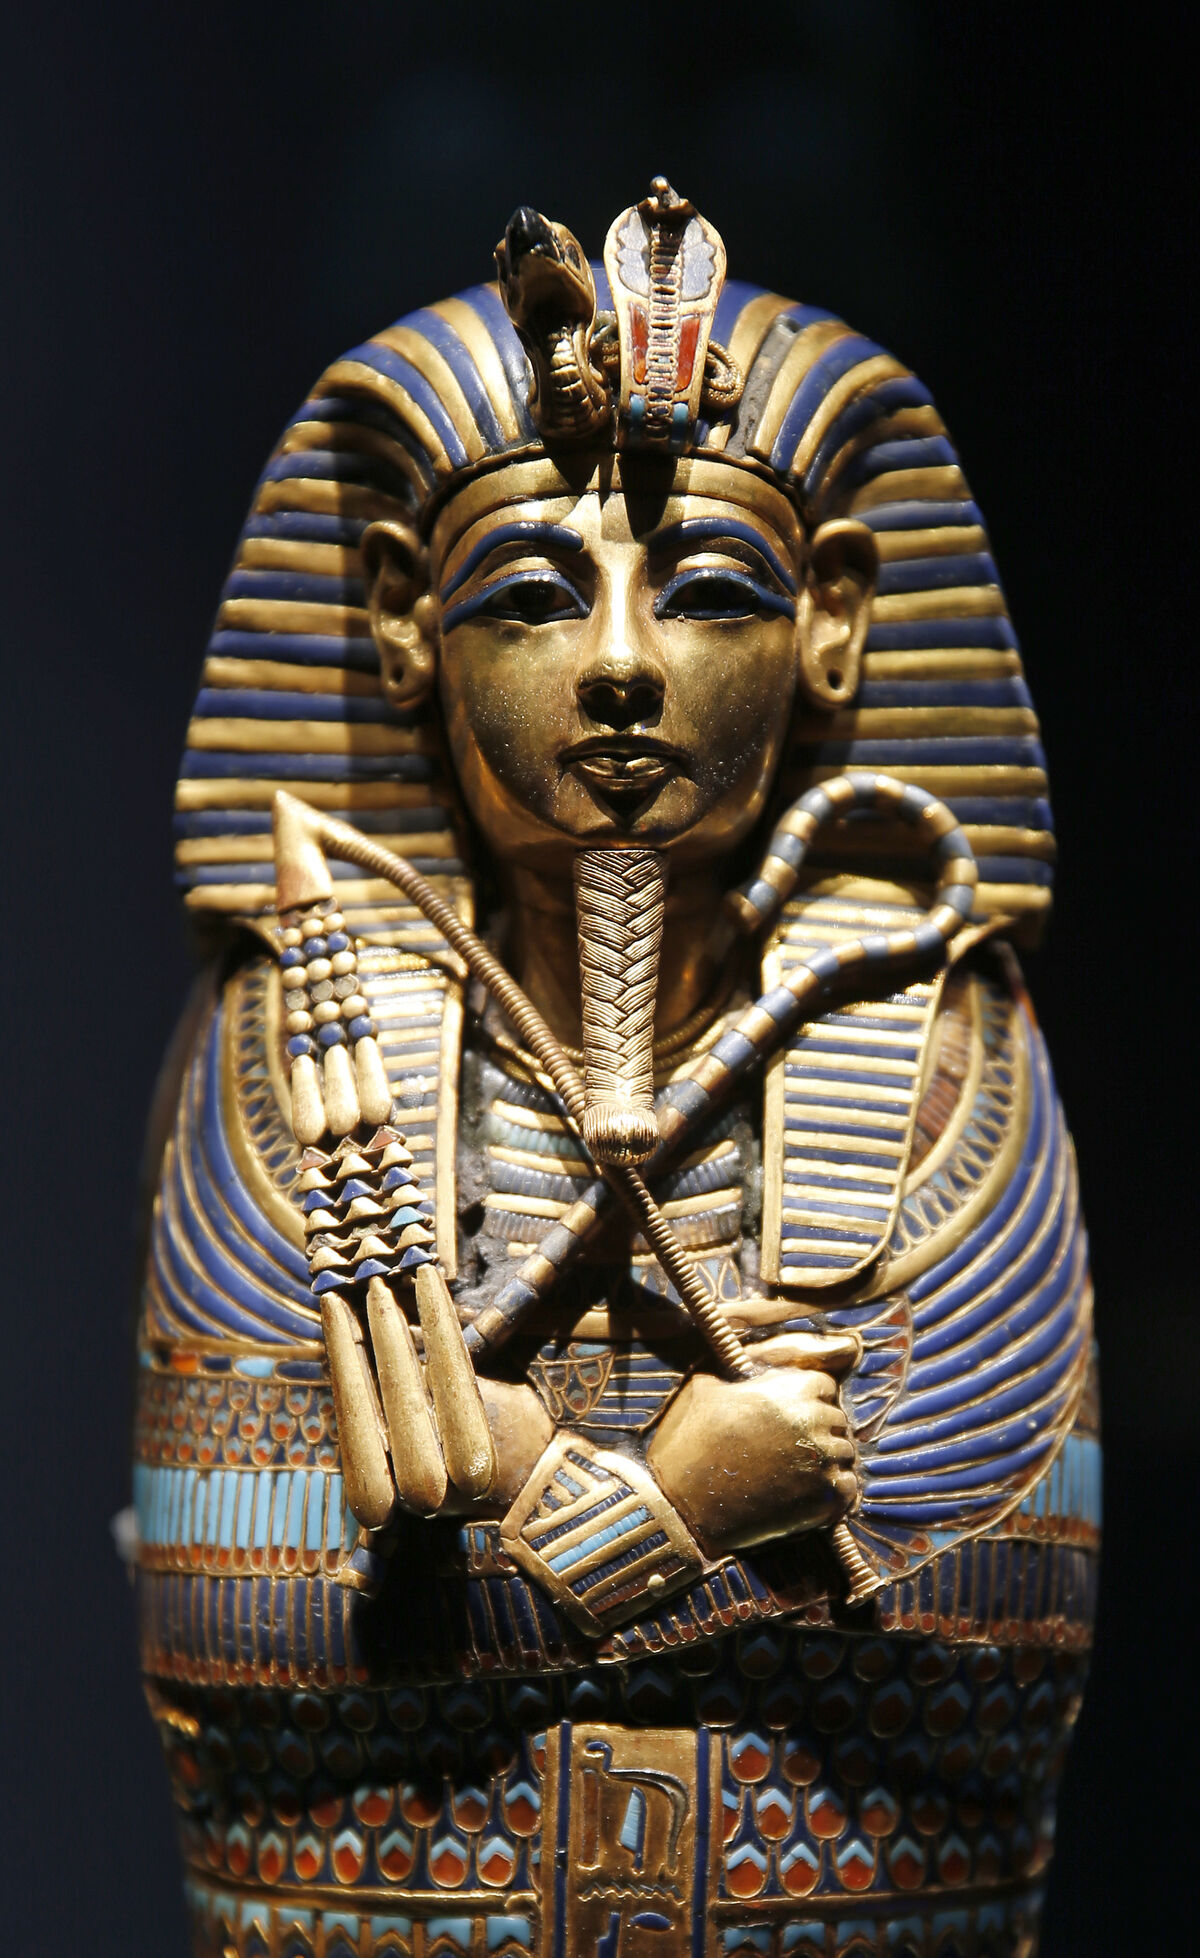 Coffinette of Tutankhamen dedicated to Imseti and Isis is displayed during the “Tutankhamun: Treasures of the Golden Pharaoh” exhibition held at the Grande Halle of La Villette. Photo by Chesnot/Getty Images.